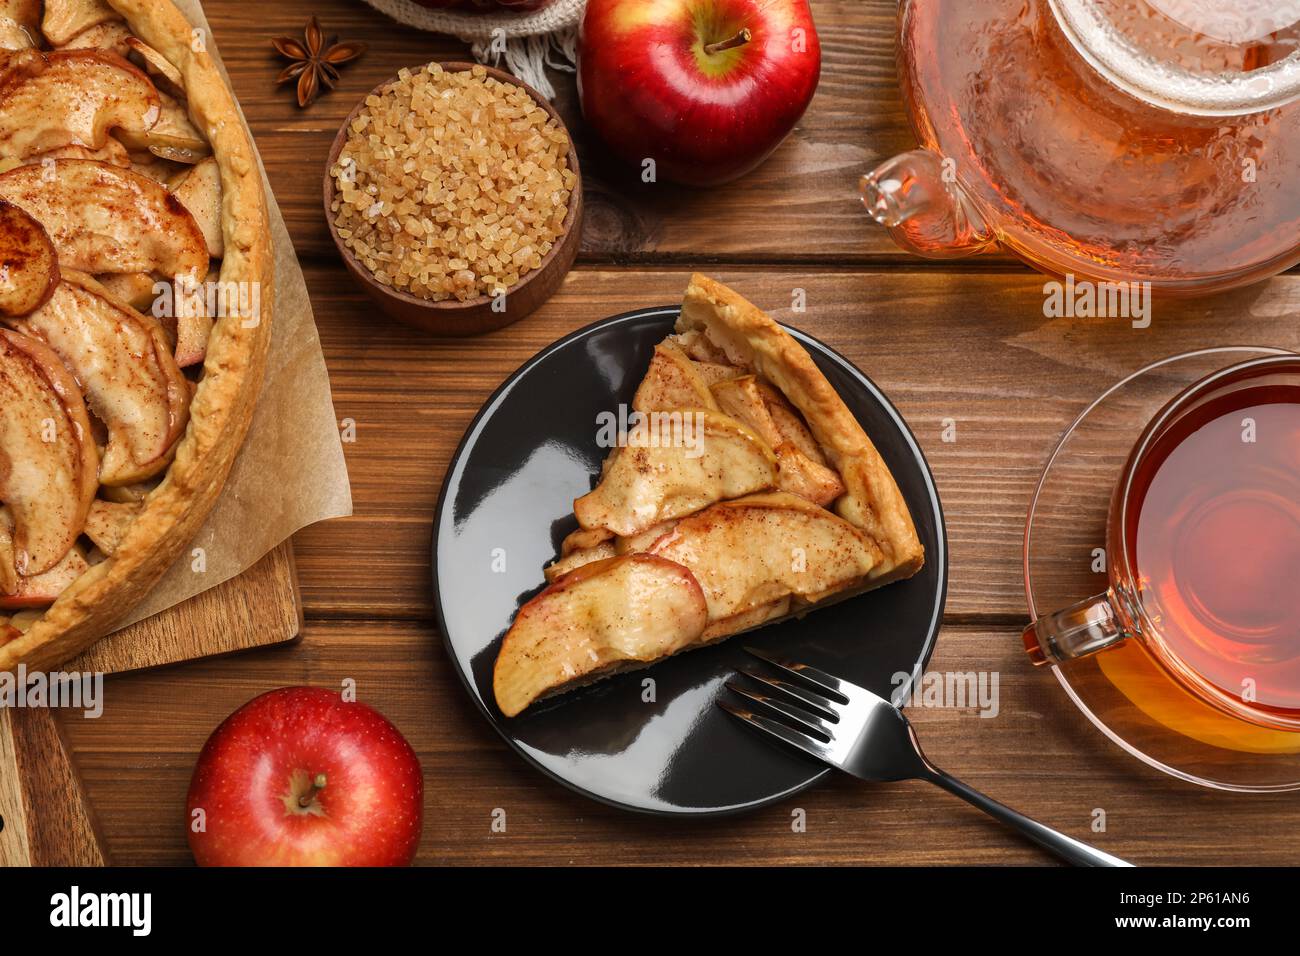 Delicious apple pie served with tea on wooden table, flat lay Stock Photo